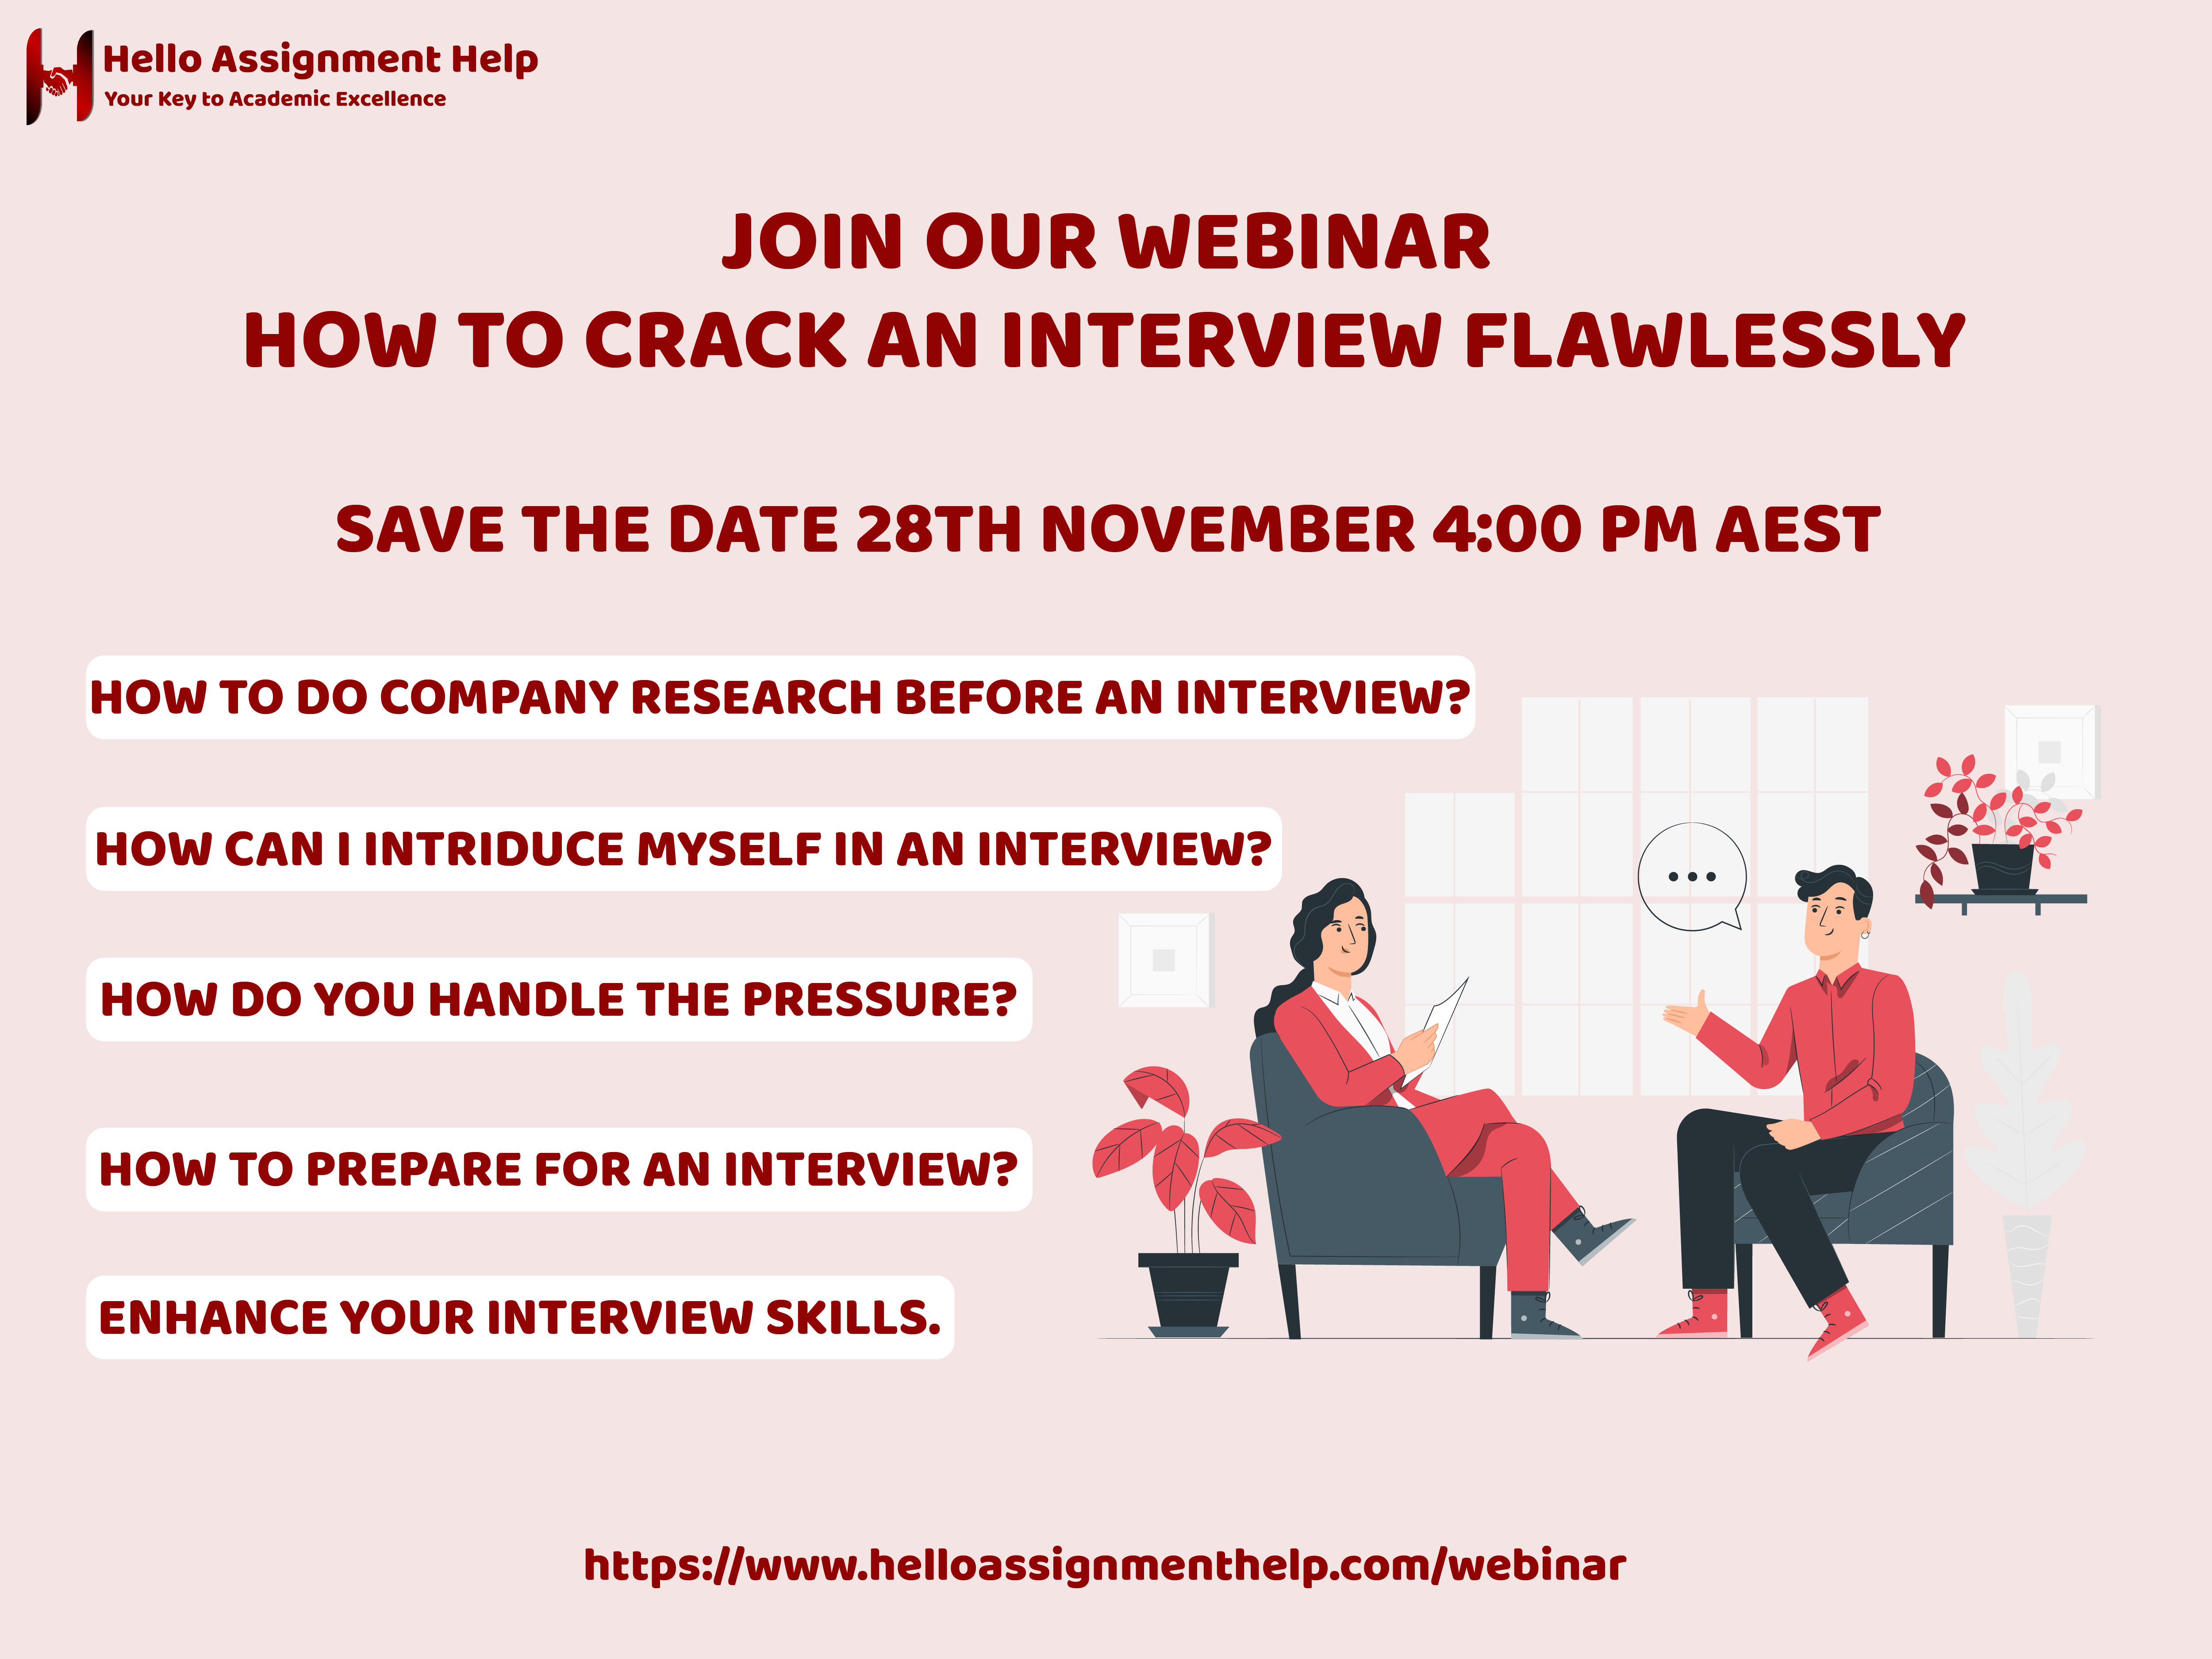 How To Crack An Interview Flawlessly?, Online Event